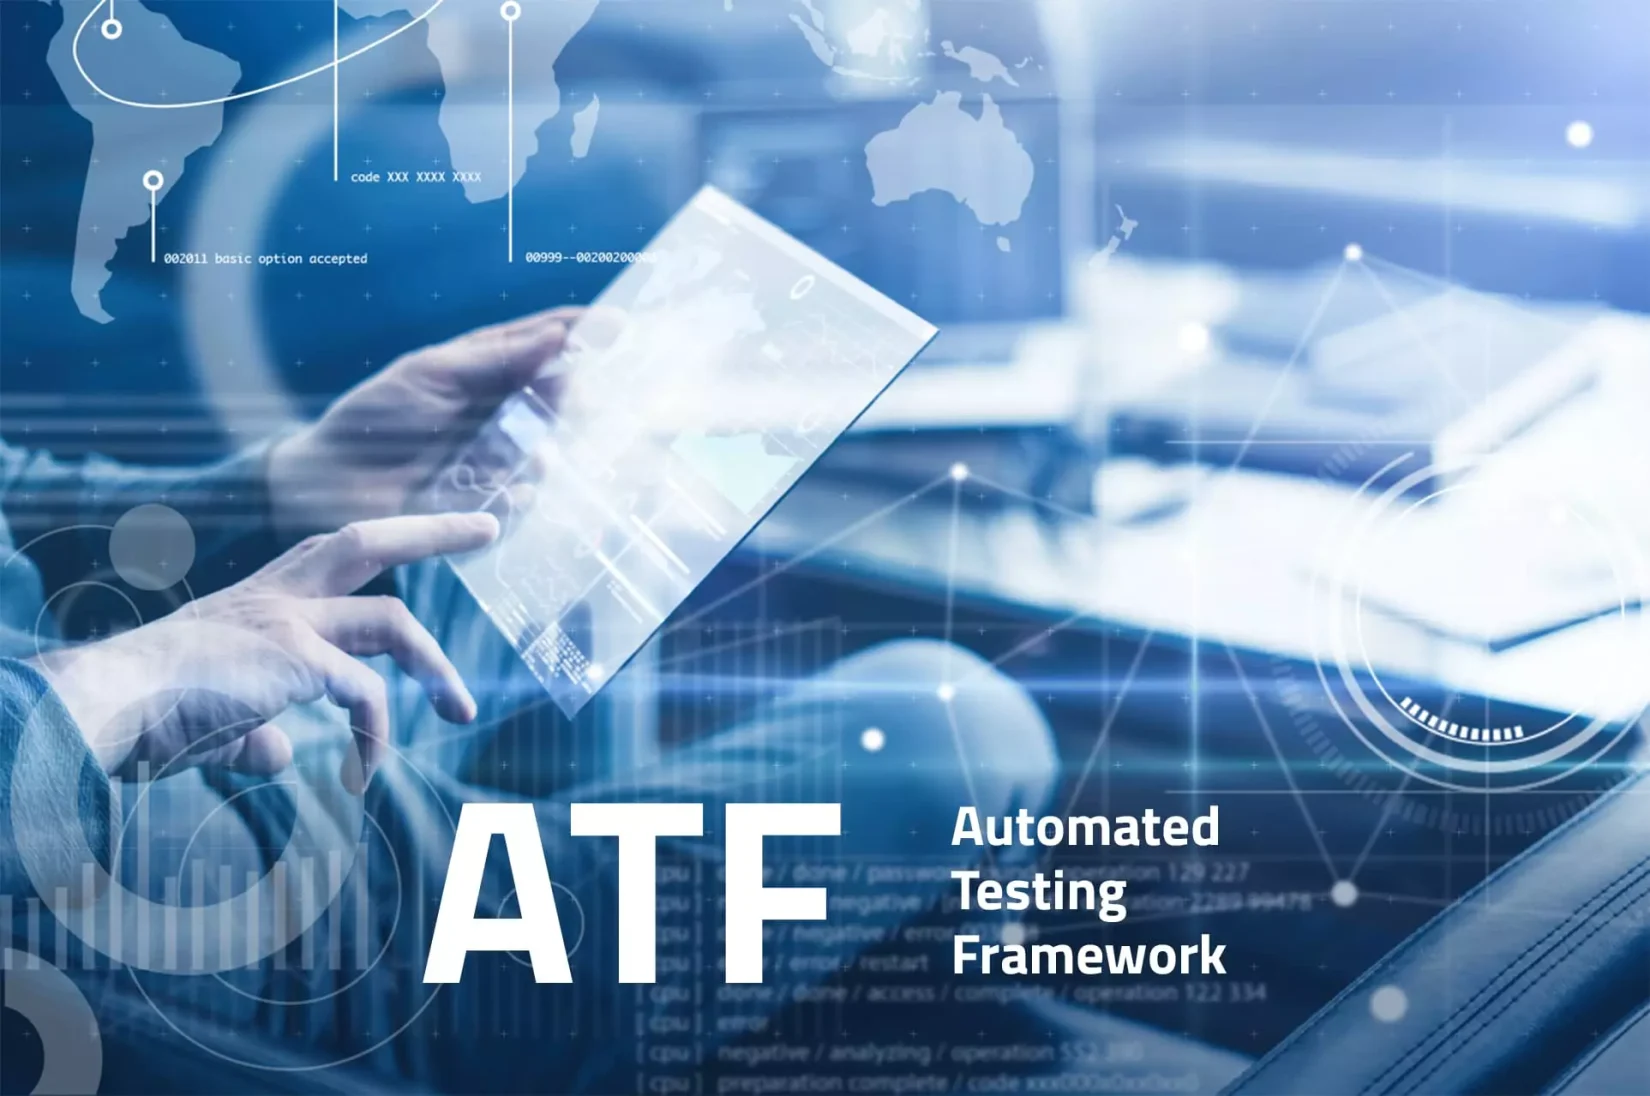 Frequently Asked Questions about ATF